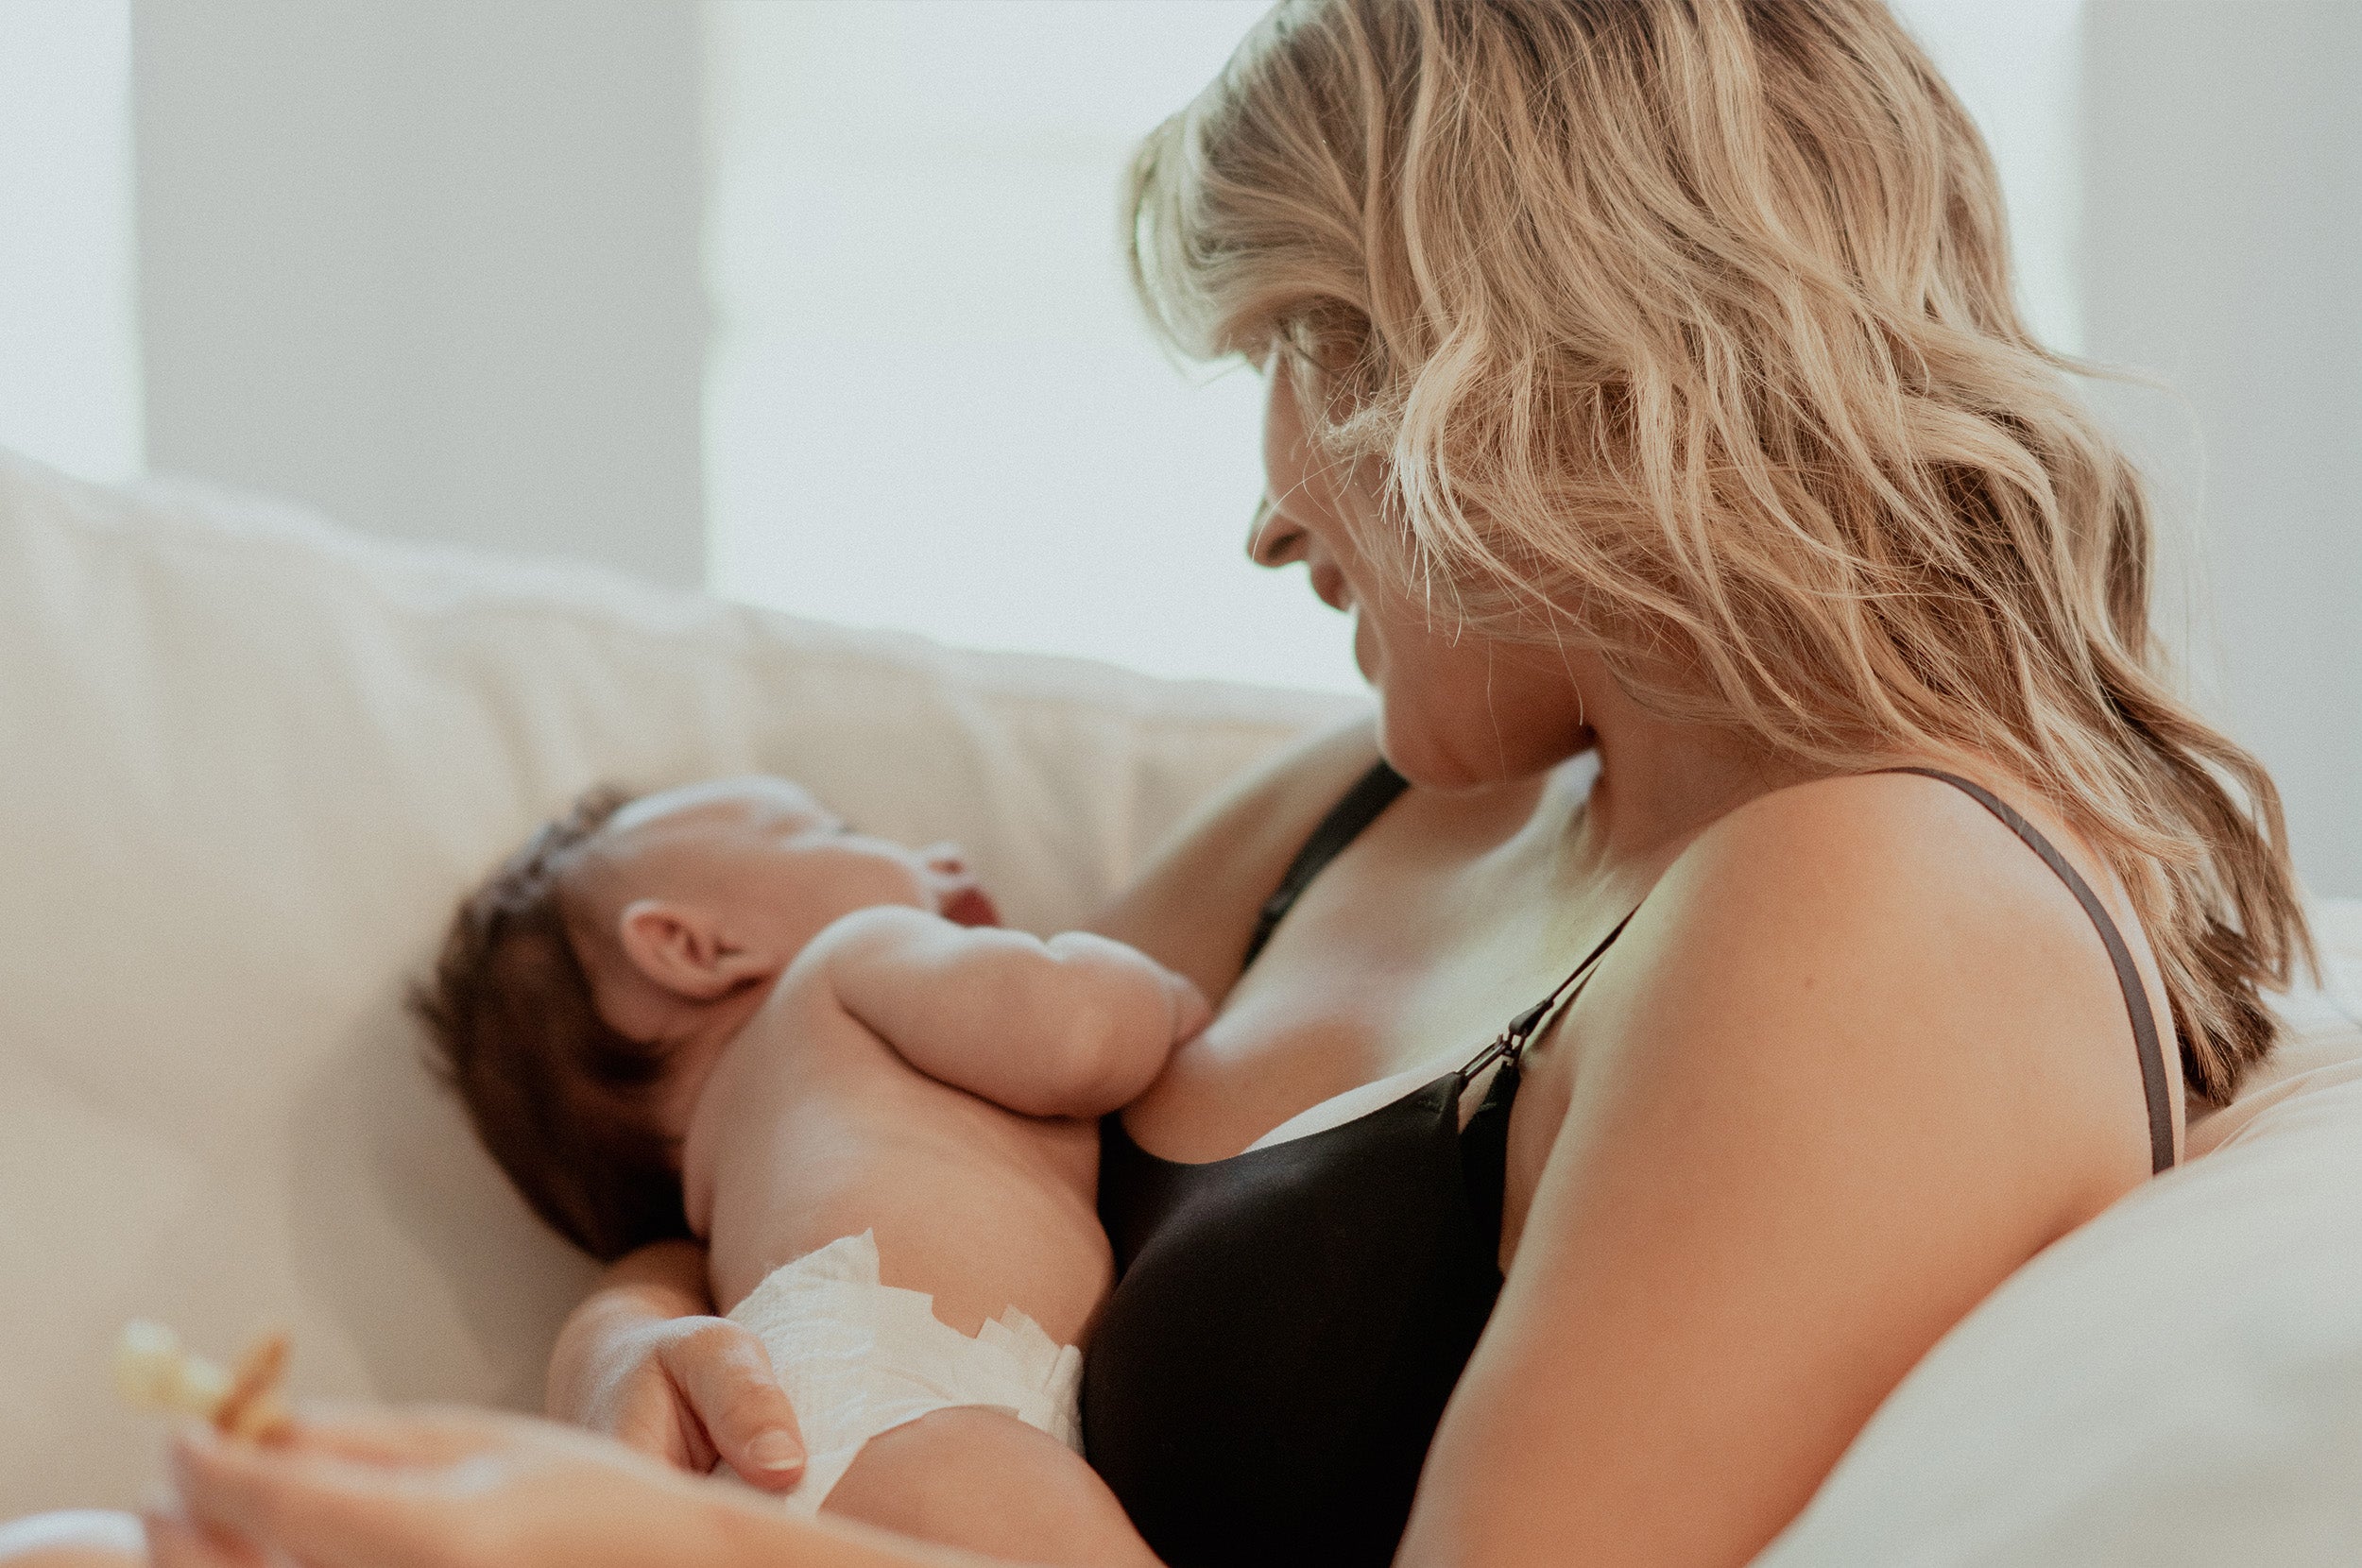 Comfortable and Supportive: The Best Nursing Bras for Breastfeeding Moms